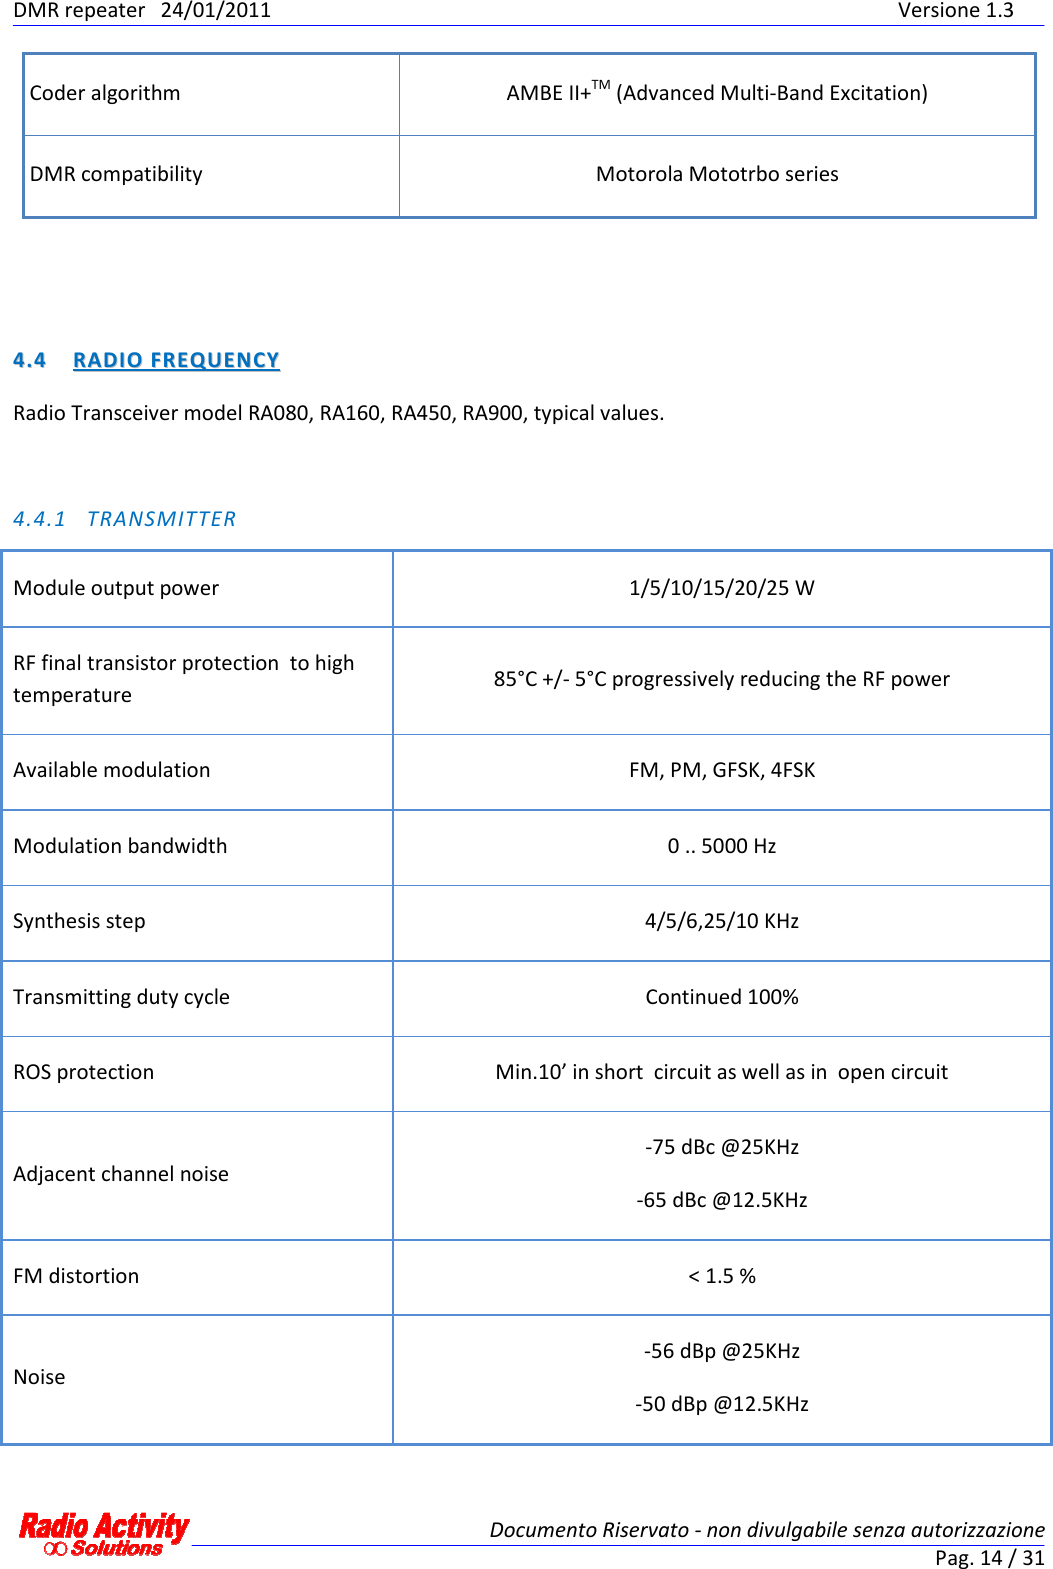 DMR repeater  24/01/2011                  Versione 1.3   Documento Riservato - non divulgabile senza autorizzazione Pag. 14 / 31 Coder algorithm  AMBE II+TM (Advanced Multi-Band Excitation) DMR compatibility  Motorola Mototrbo series   44..44  RRAADDIIOO  FFRREEQQUUEENNCCYY  Radio Transceiver model RA080, RA160, RA450, RA900, typical values.  4.4.1 TRANSMITTER Module output power  1/5/10/15/20/25 W RF final transistor protection  to high temperature   85°C +/- 5°C progressively reducing the RF power Available modulation  FM, PM, GFSK, 4FSK Modulation bandwidth  0 .. 5000 Hz Synthesis step  4/5/6,25/10 KHz Transmitting duty cycle  Continued 100% ROS protection  Min.10’ in short  circuit as well as in  open circuit Adjacent channel noise -75 dBc @25KHz -65 dBc @12.5KHz FM distortion  &lt; 1.5 % Noise -56 dBp @25KHz -50 dBp @12.5KHz 